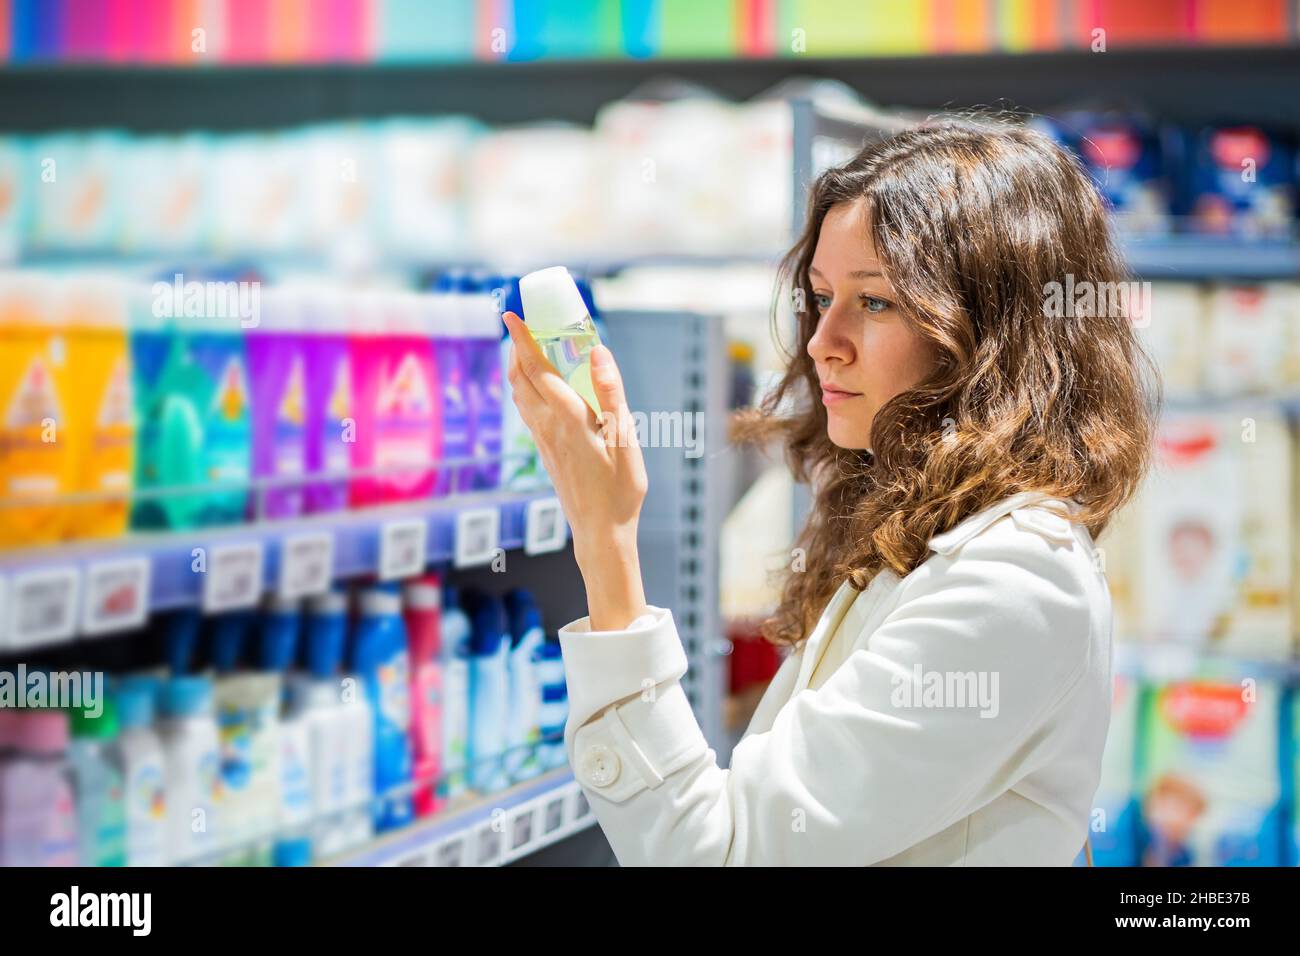 Brunette woman with long curly hair wearing white coat reads instruction on deodorant package standing in household goods store Stock Photo